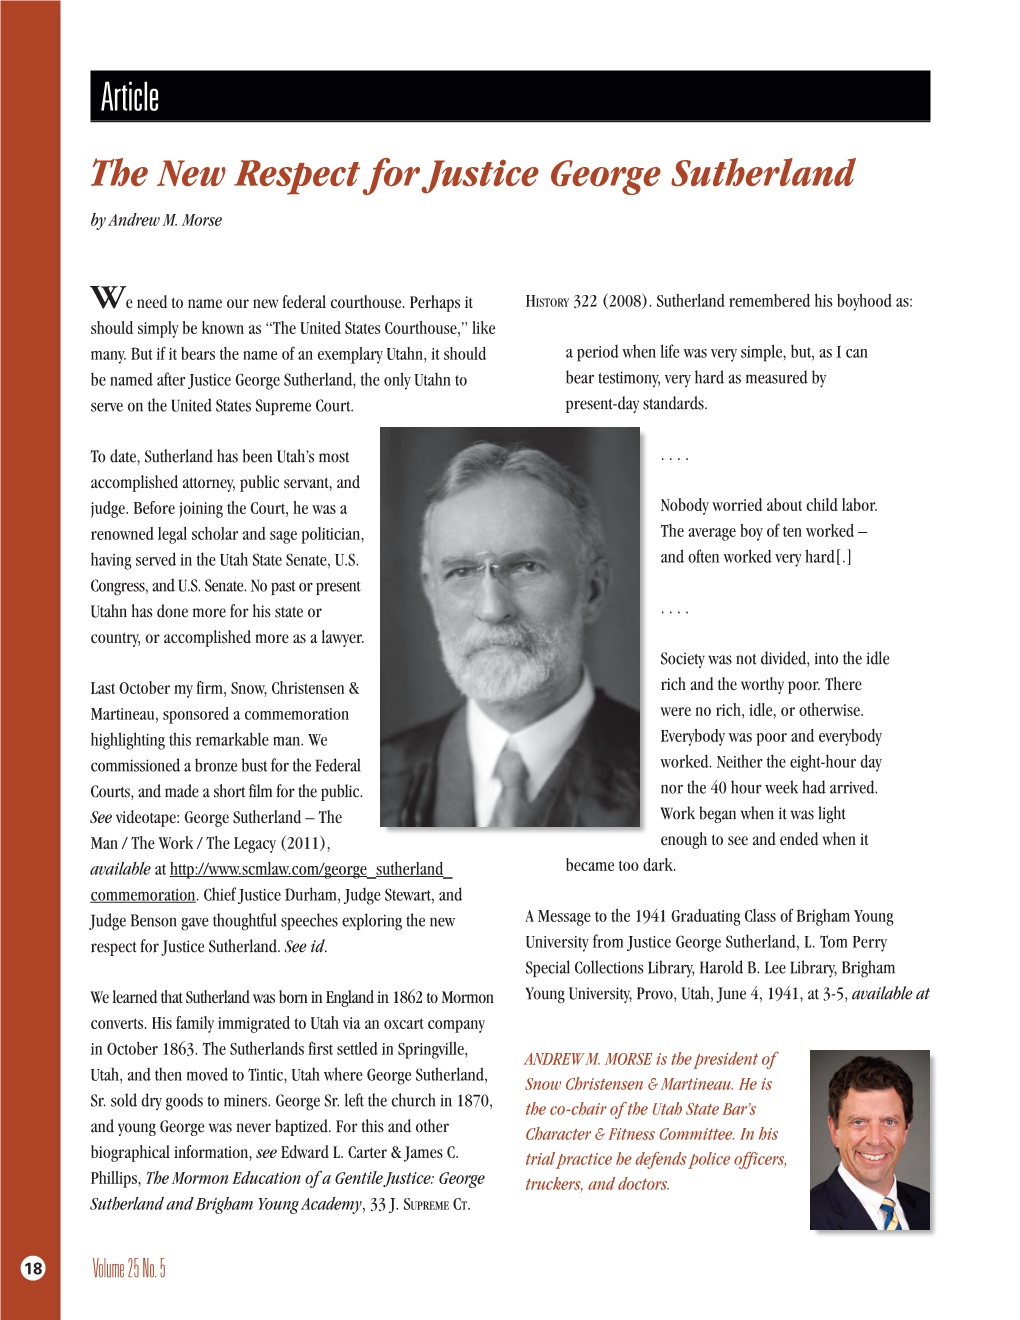 Article the New Respect for Justice George Sutherland by Andrew M